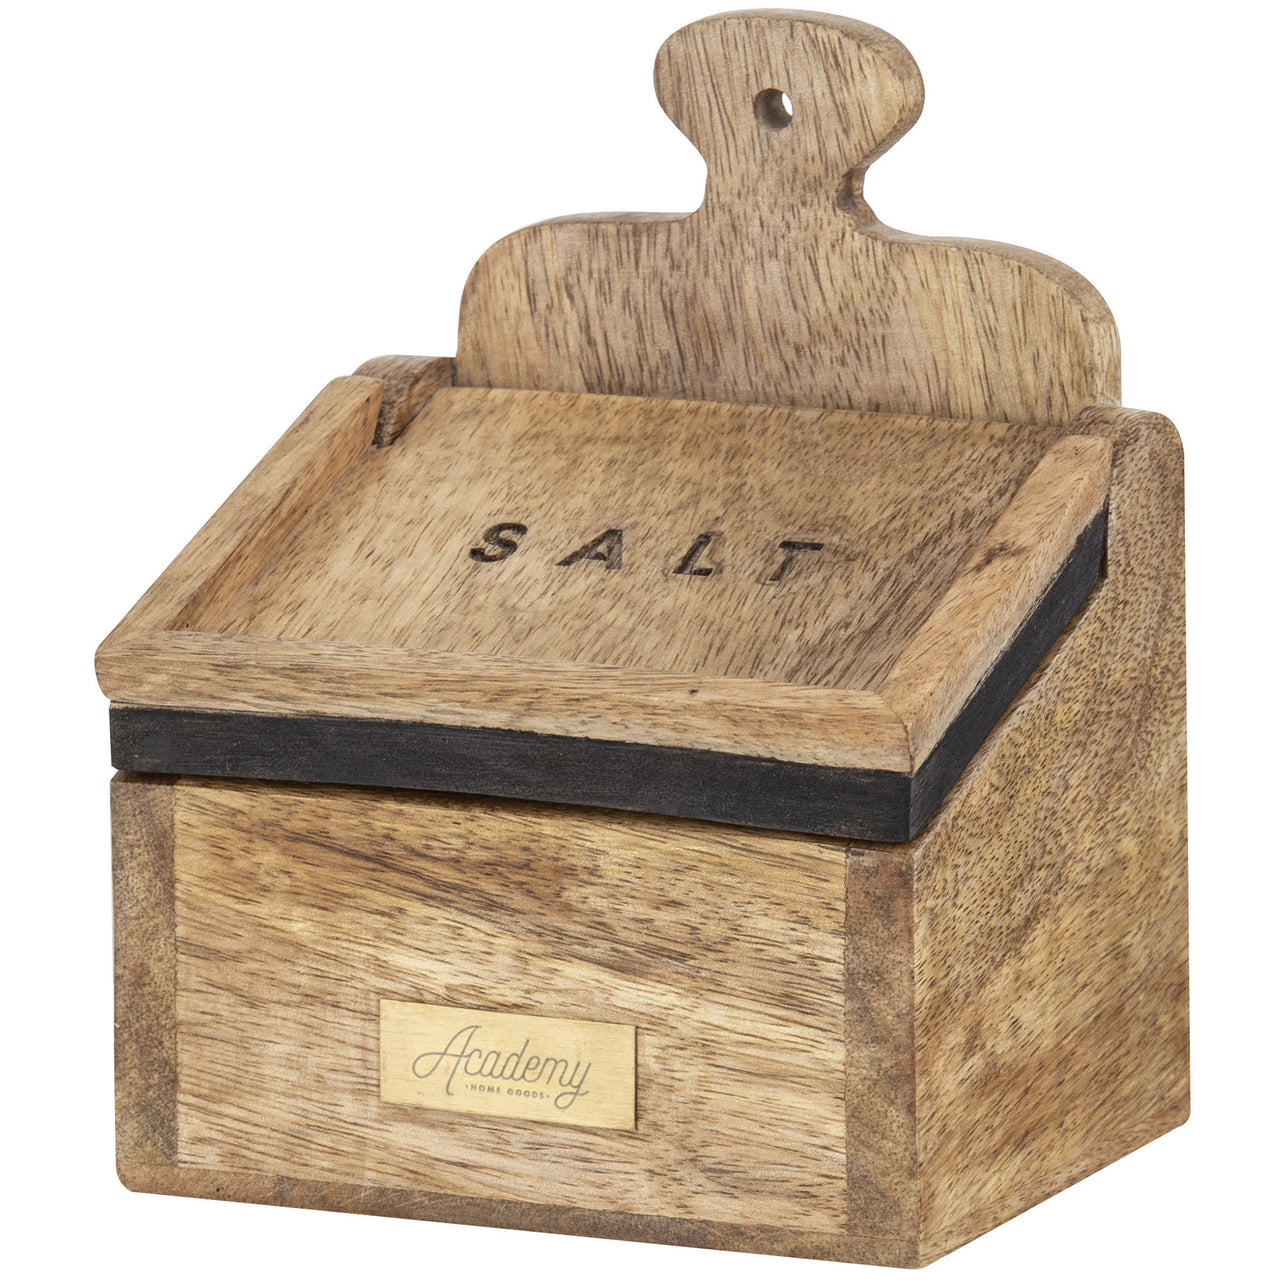 James Wooden Salt Box with Spoon